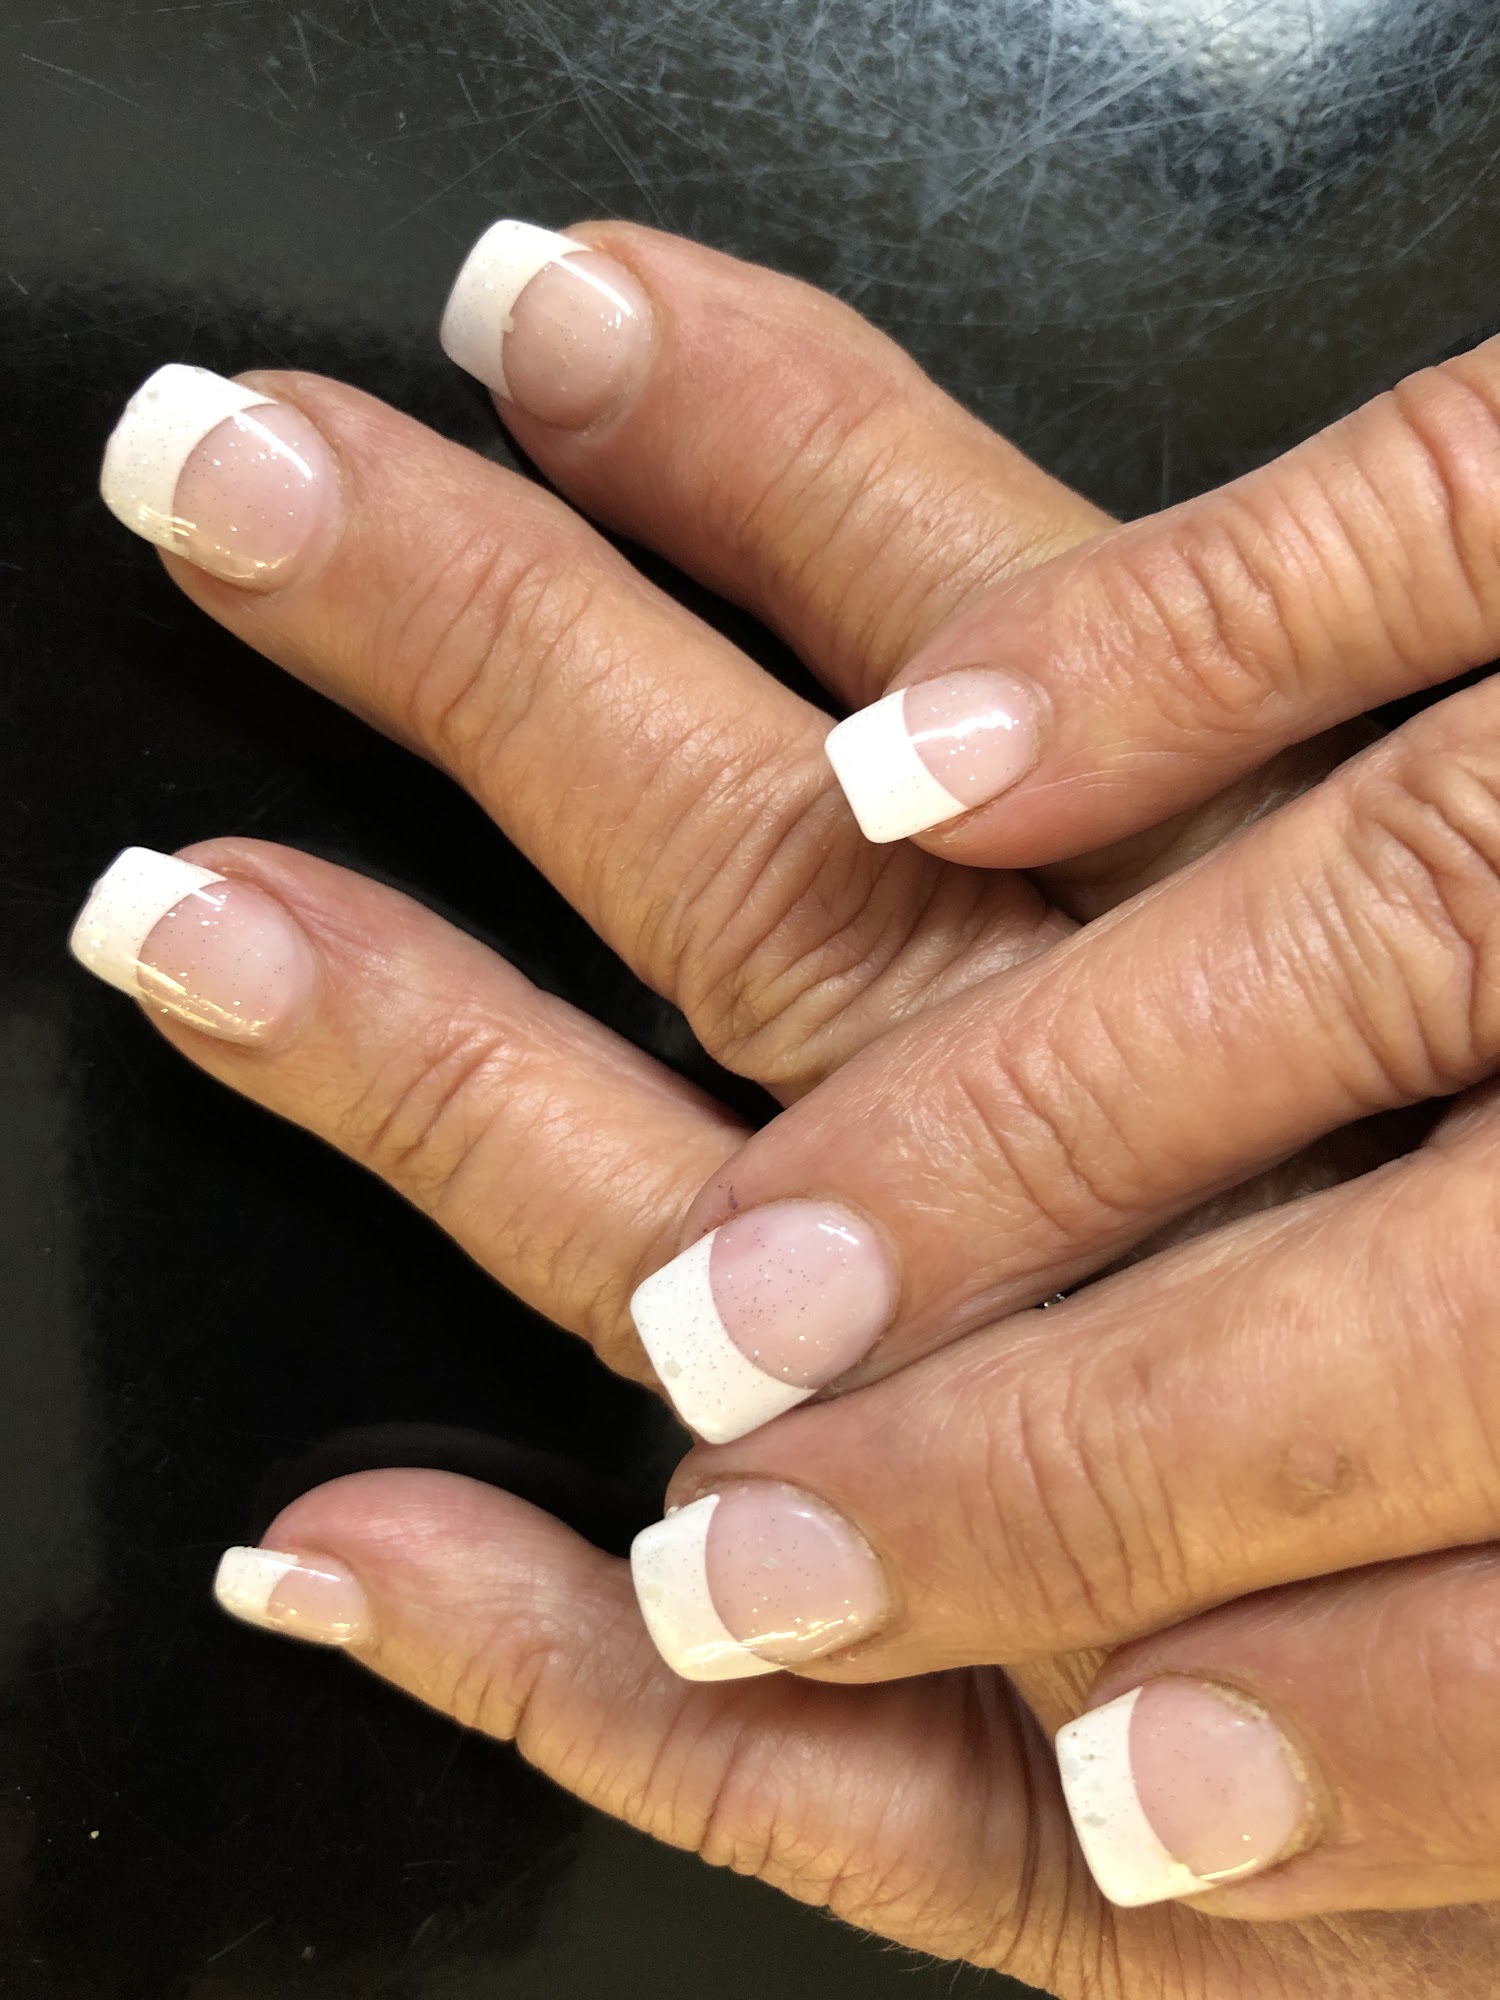 Linda's Nails 301 St Lawrence St, Gonzales Texas 78629